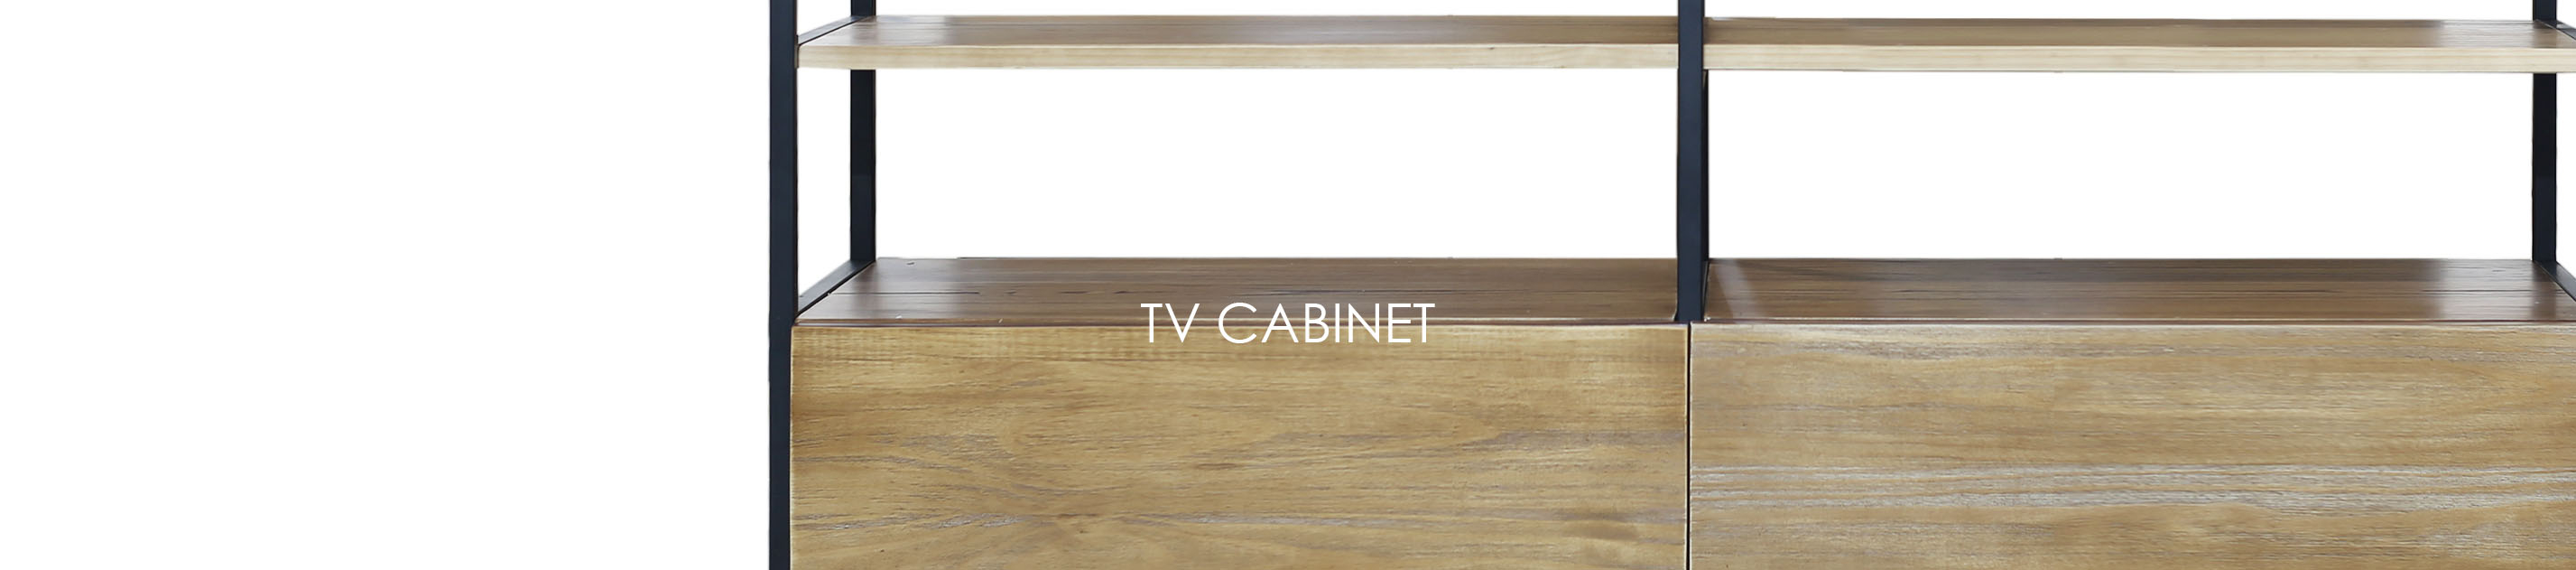 Hong Kong Furniture Shop Announces an Attractive Range of TV Cabinets & Table Lamp At Affordable Prices